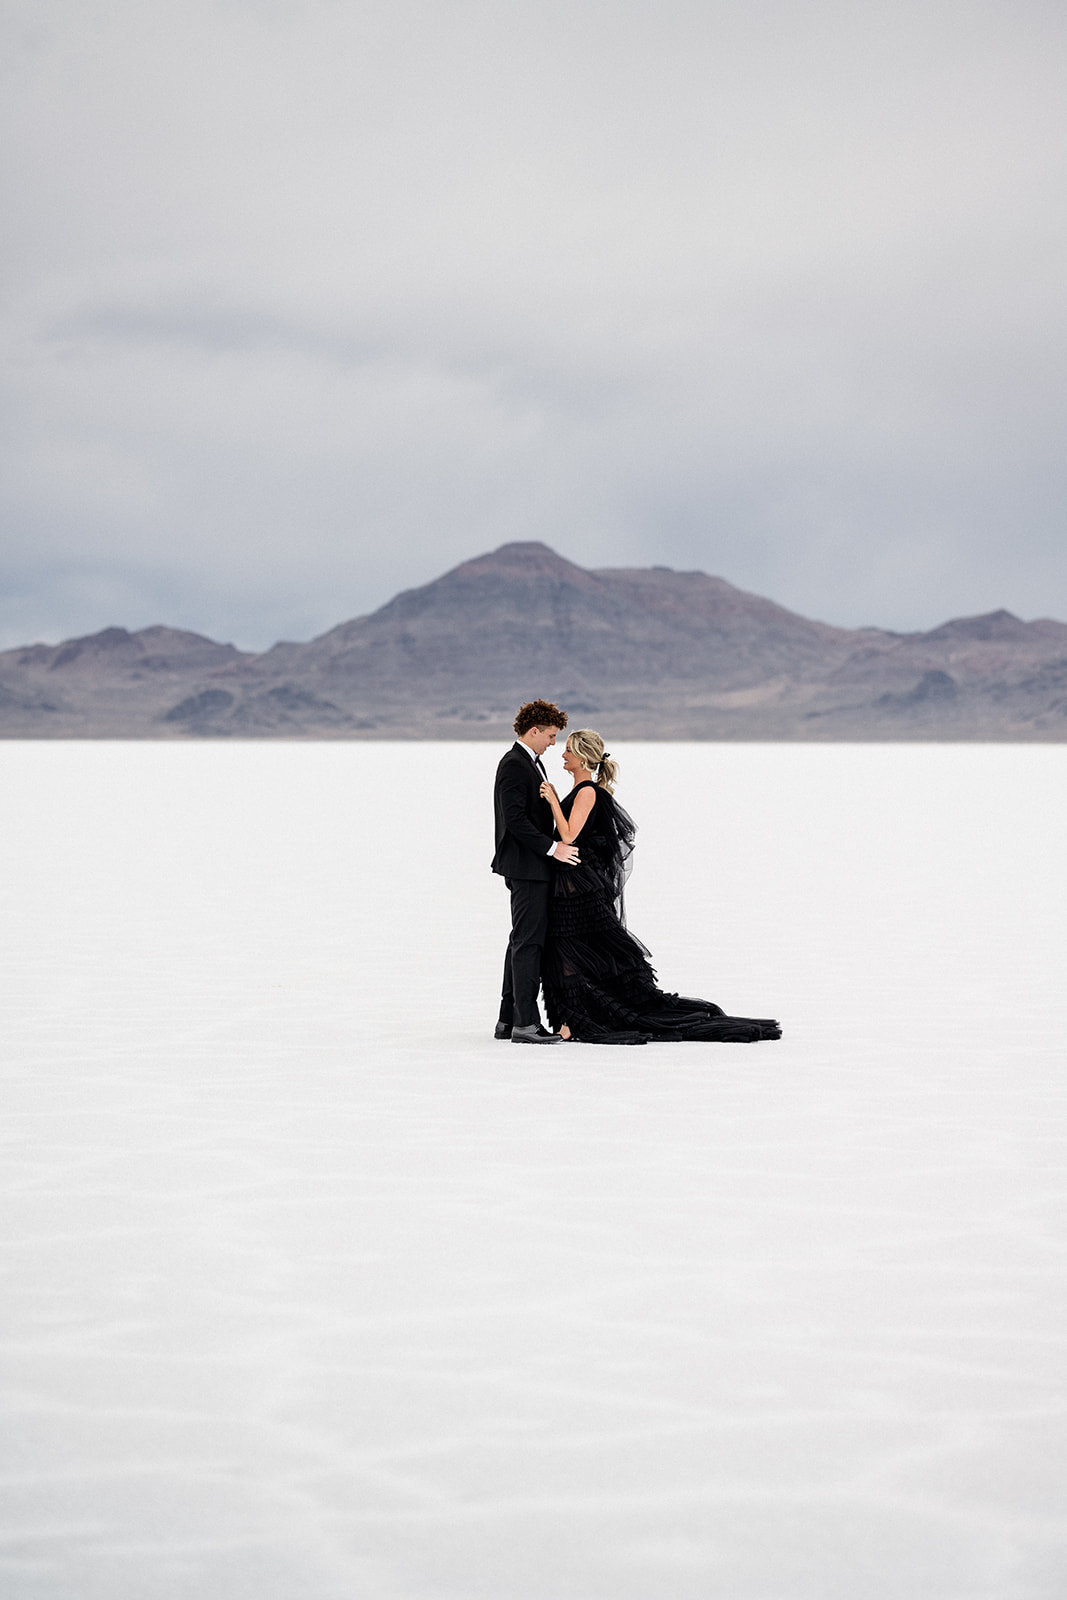 Elopement celebration with just two at the vast Utah Salt Flats